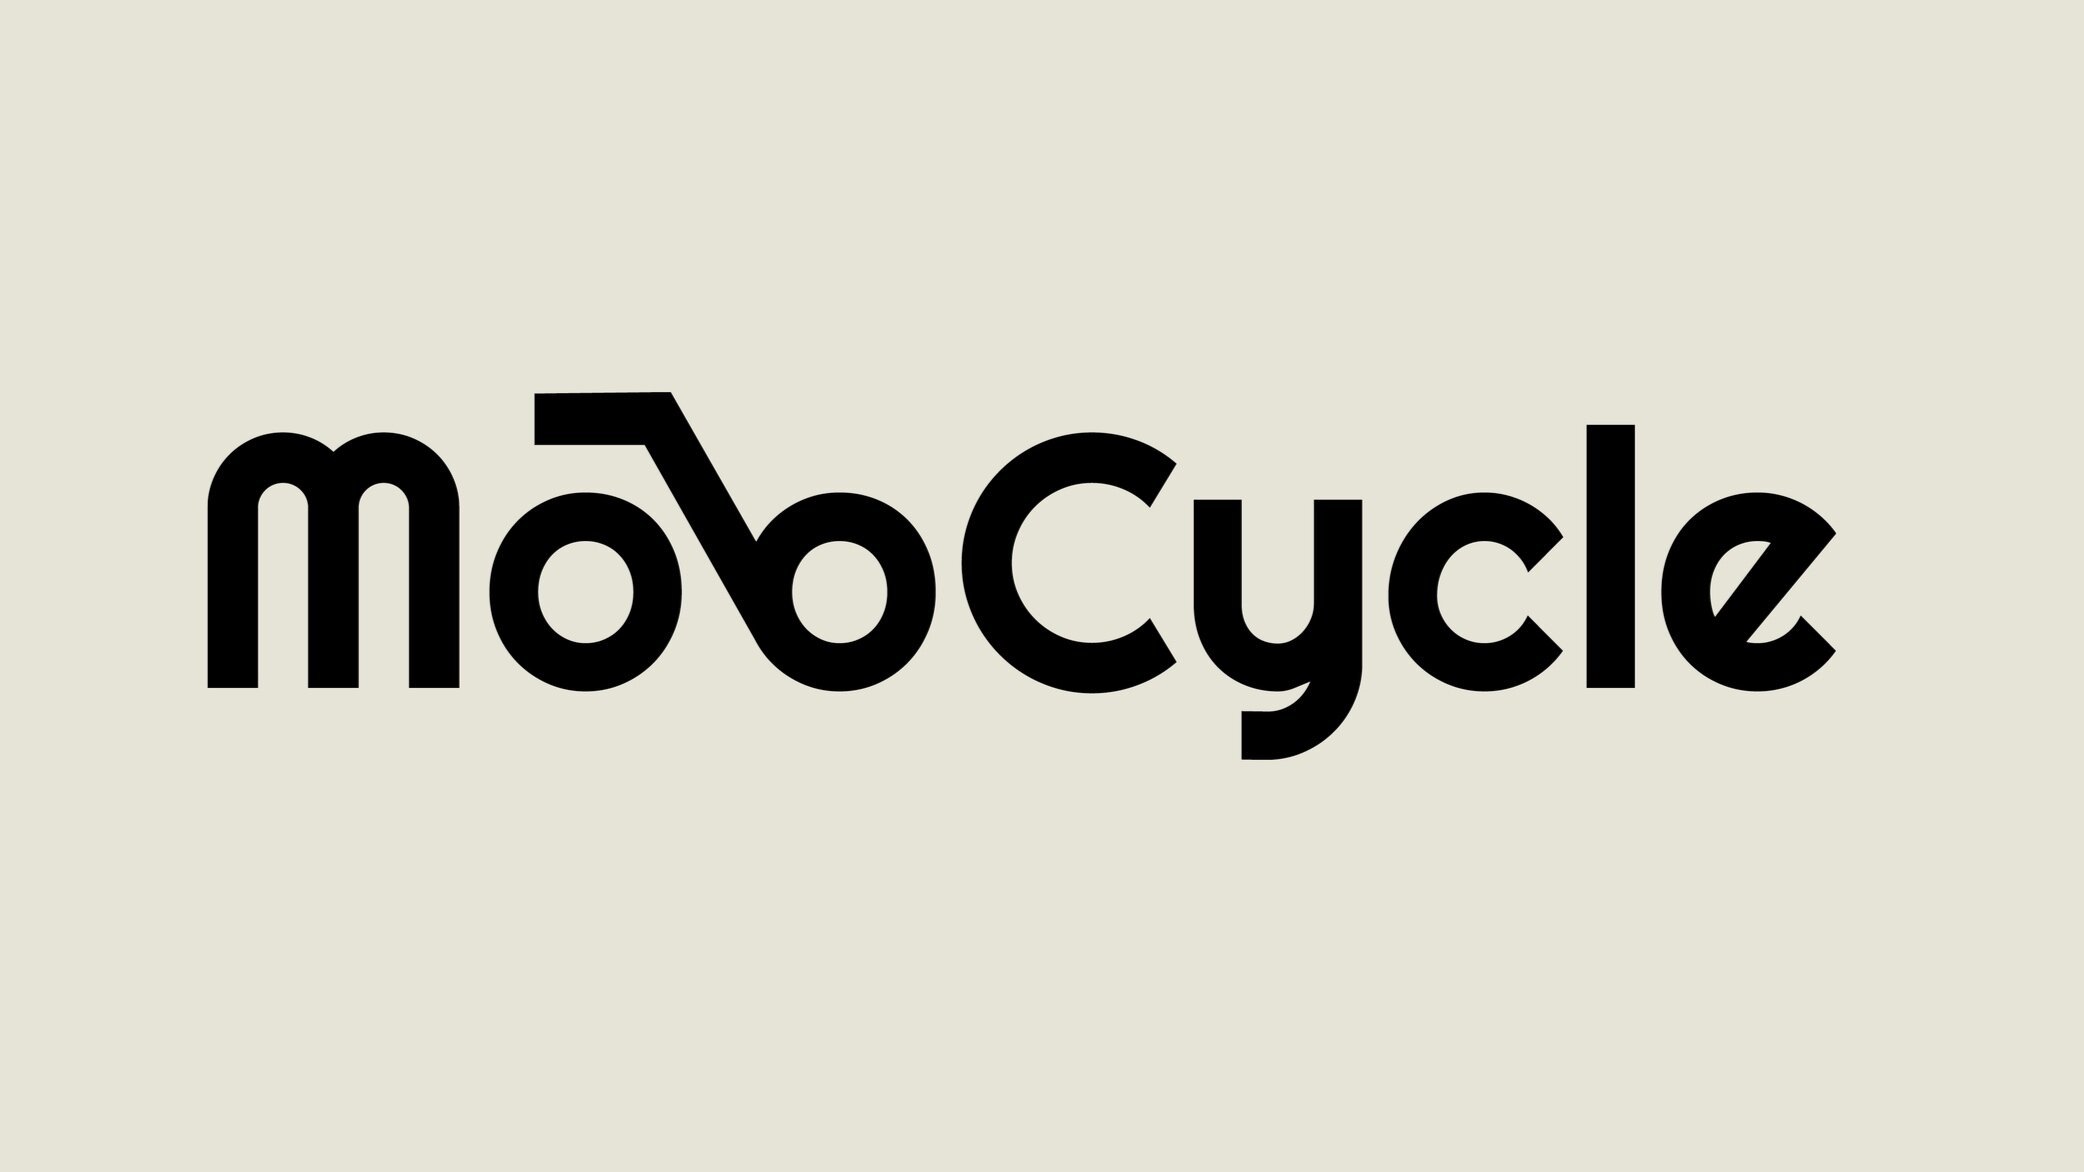 Mobcycle